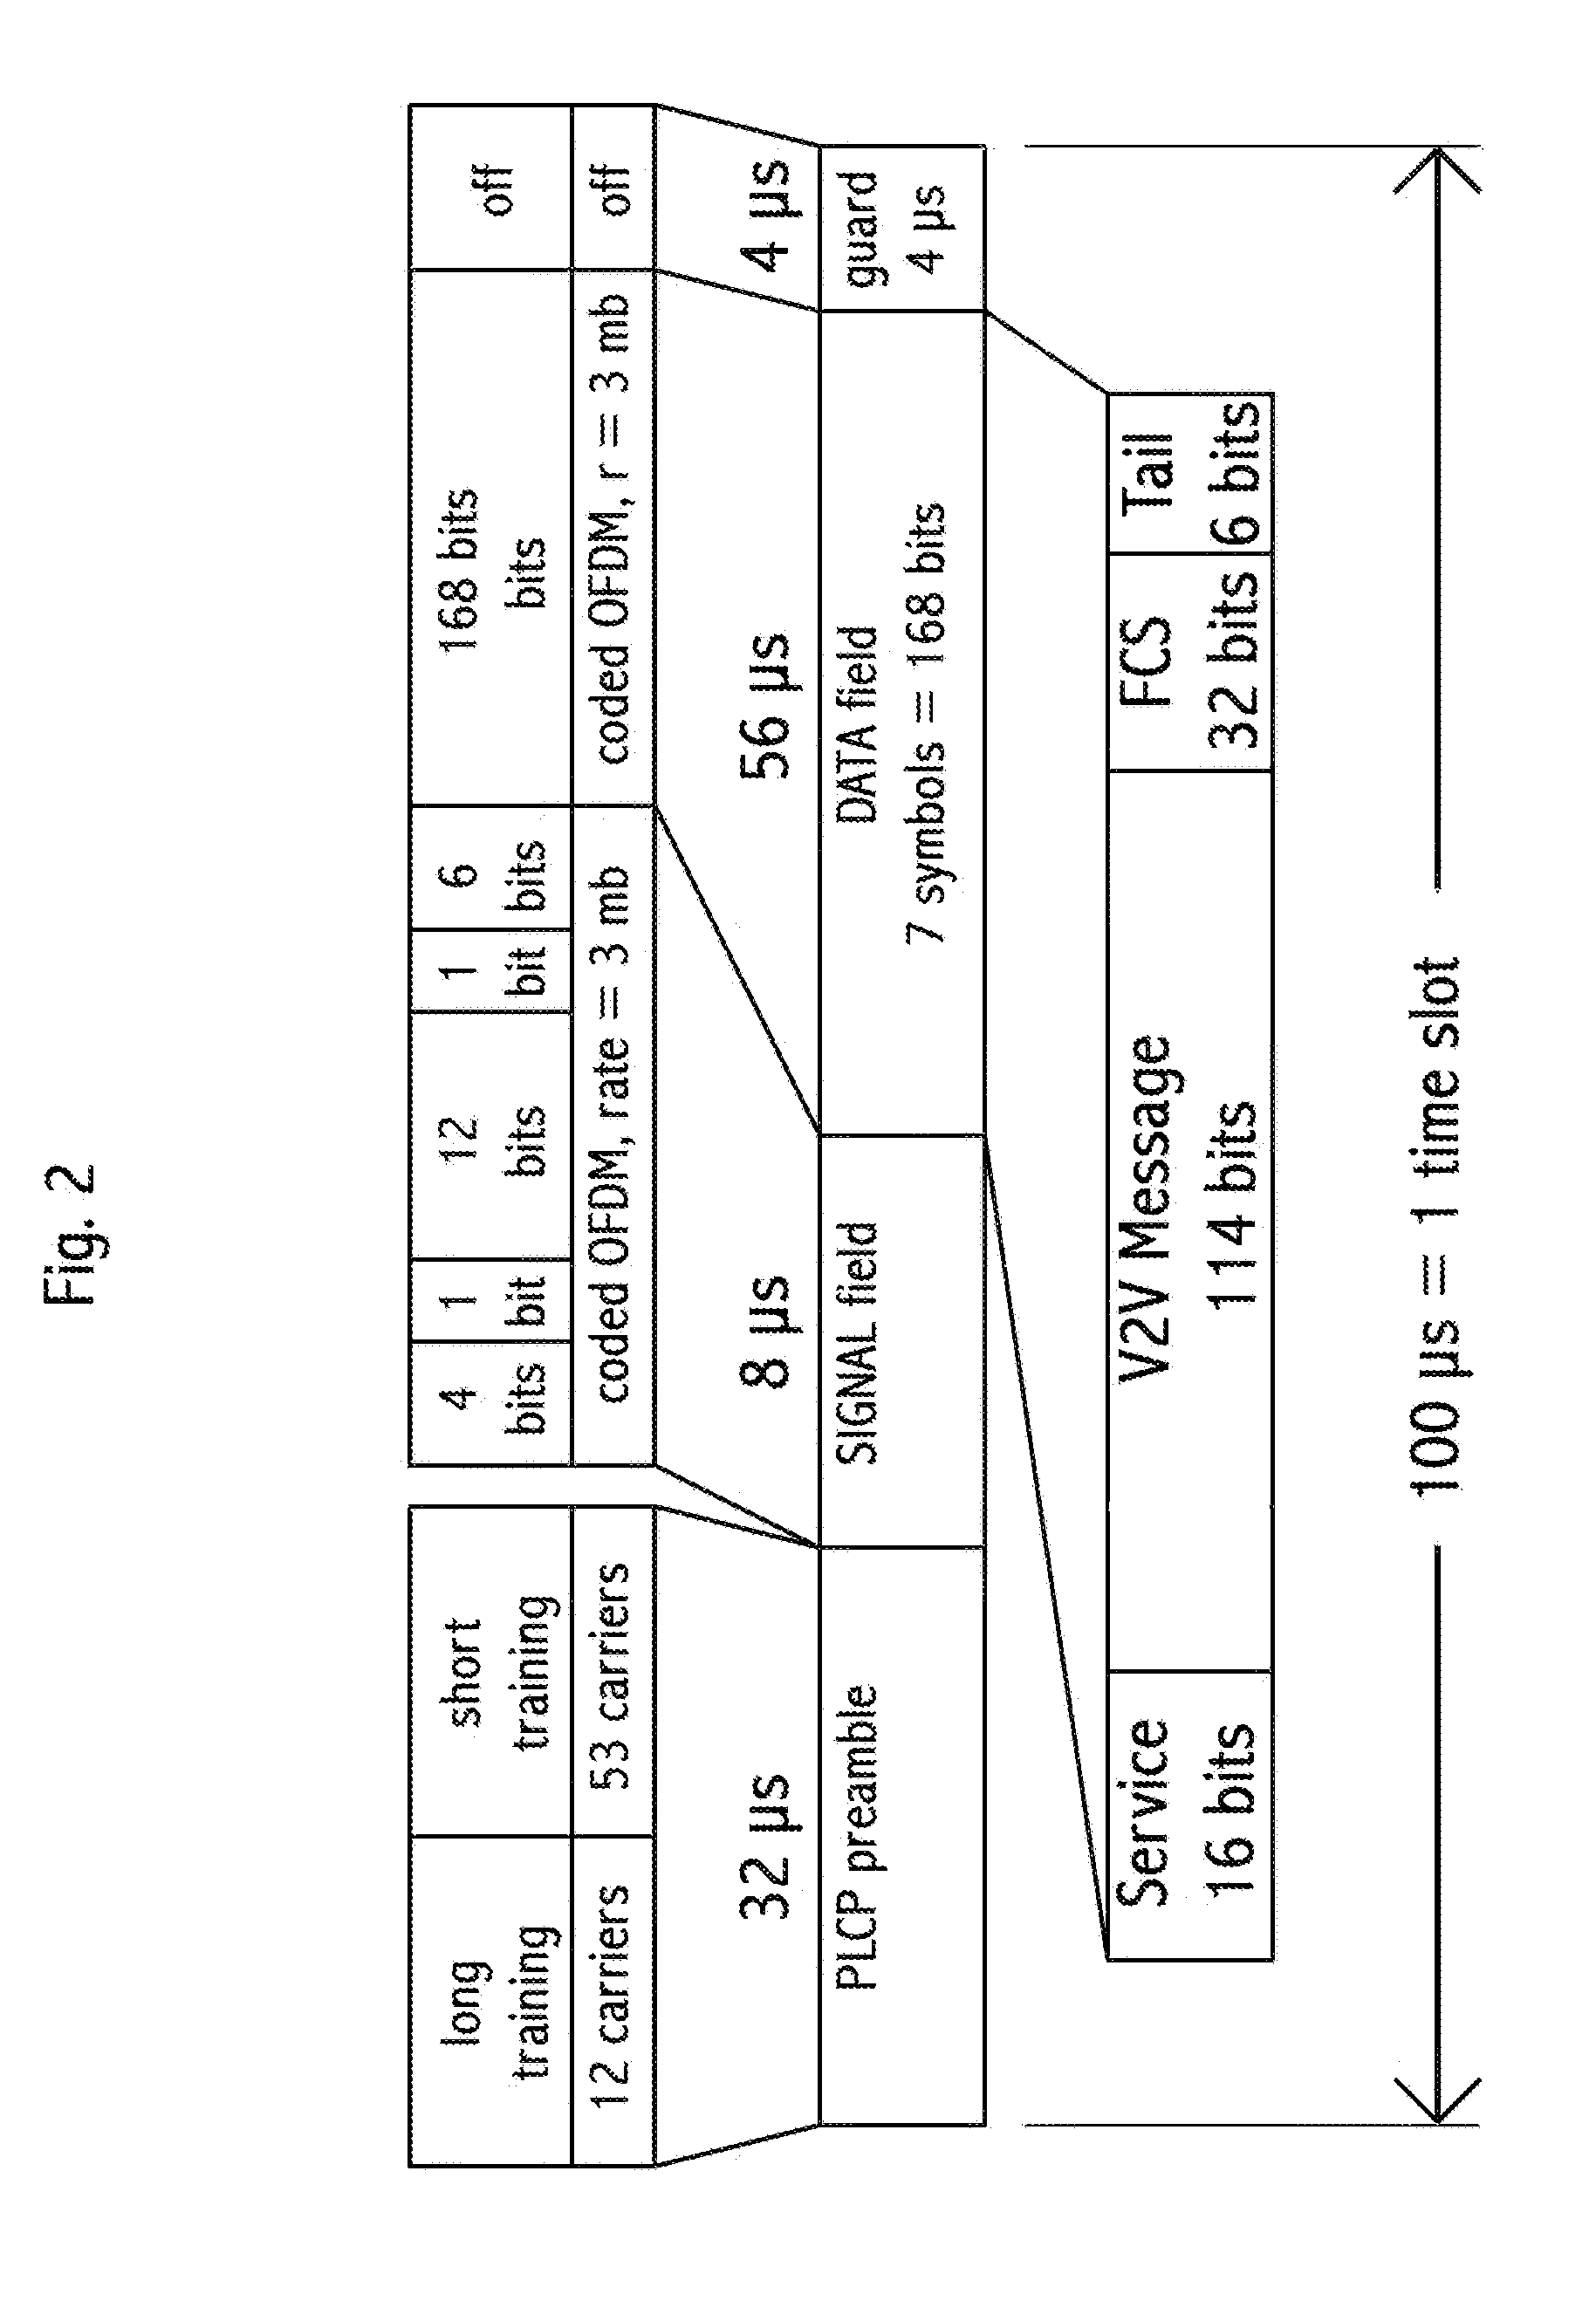 Anti-collision system and method using message formats containing distances